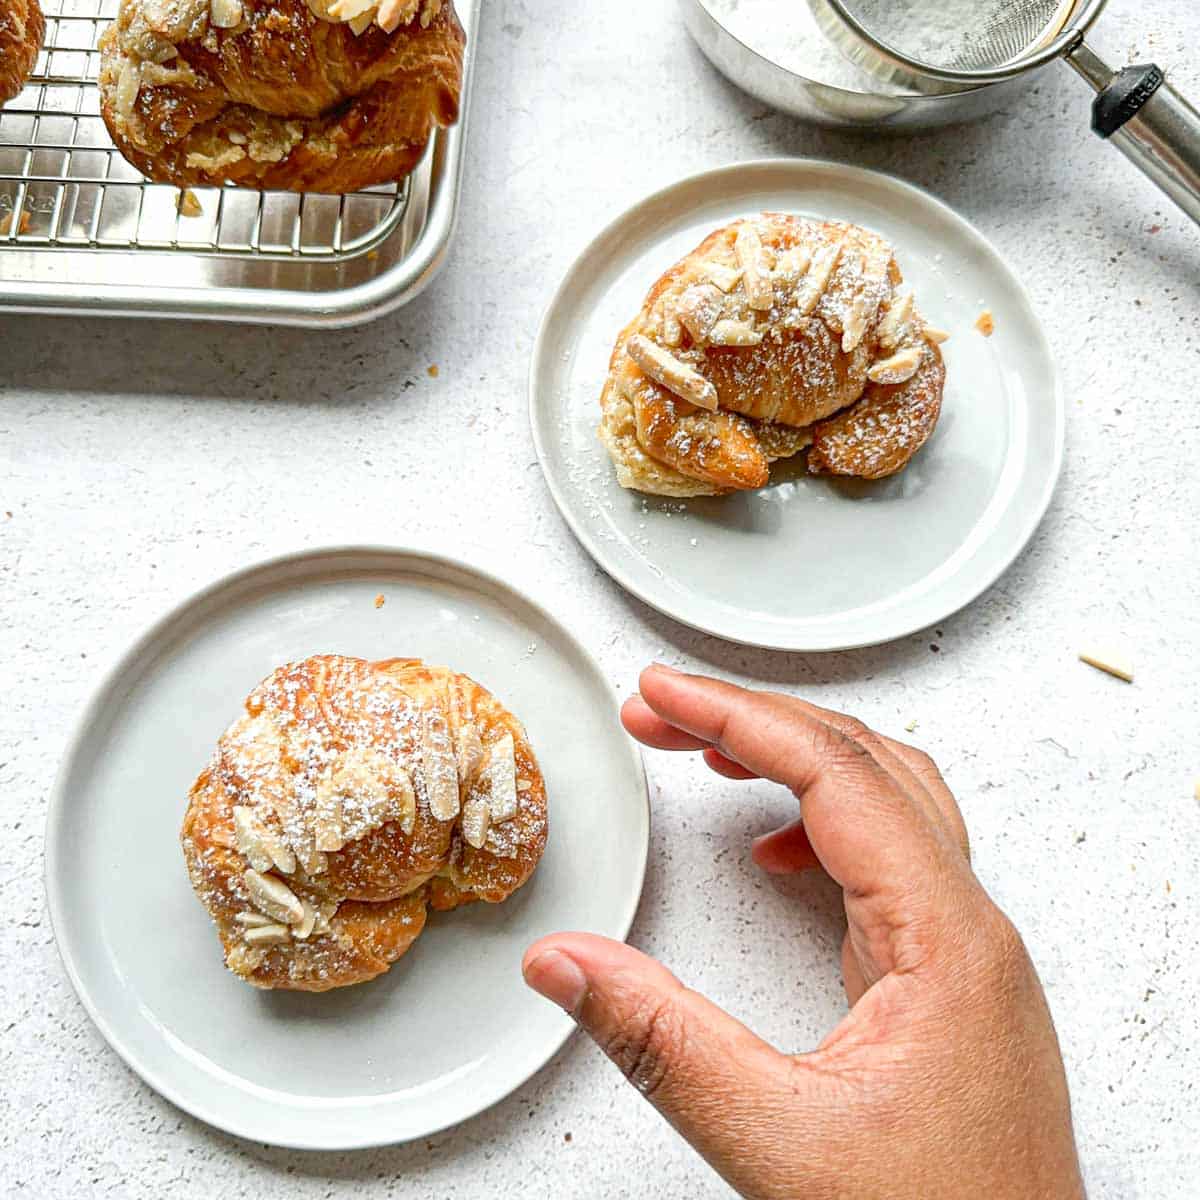 Badam halwa croissant on two plates. A hand reaching to grab a croissant.